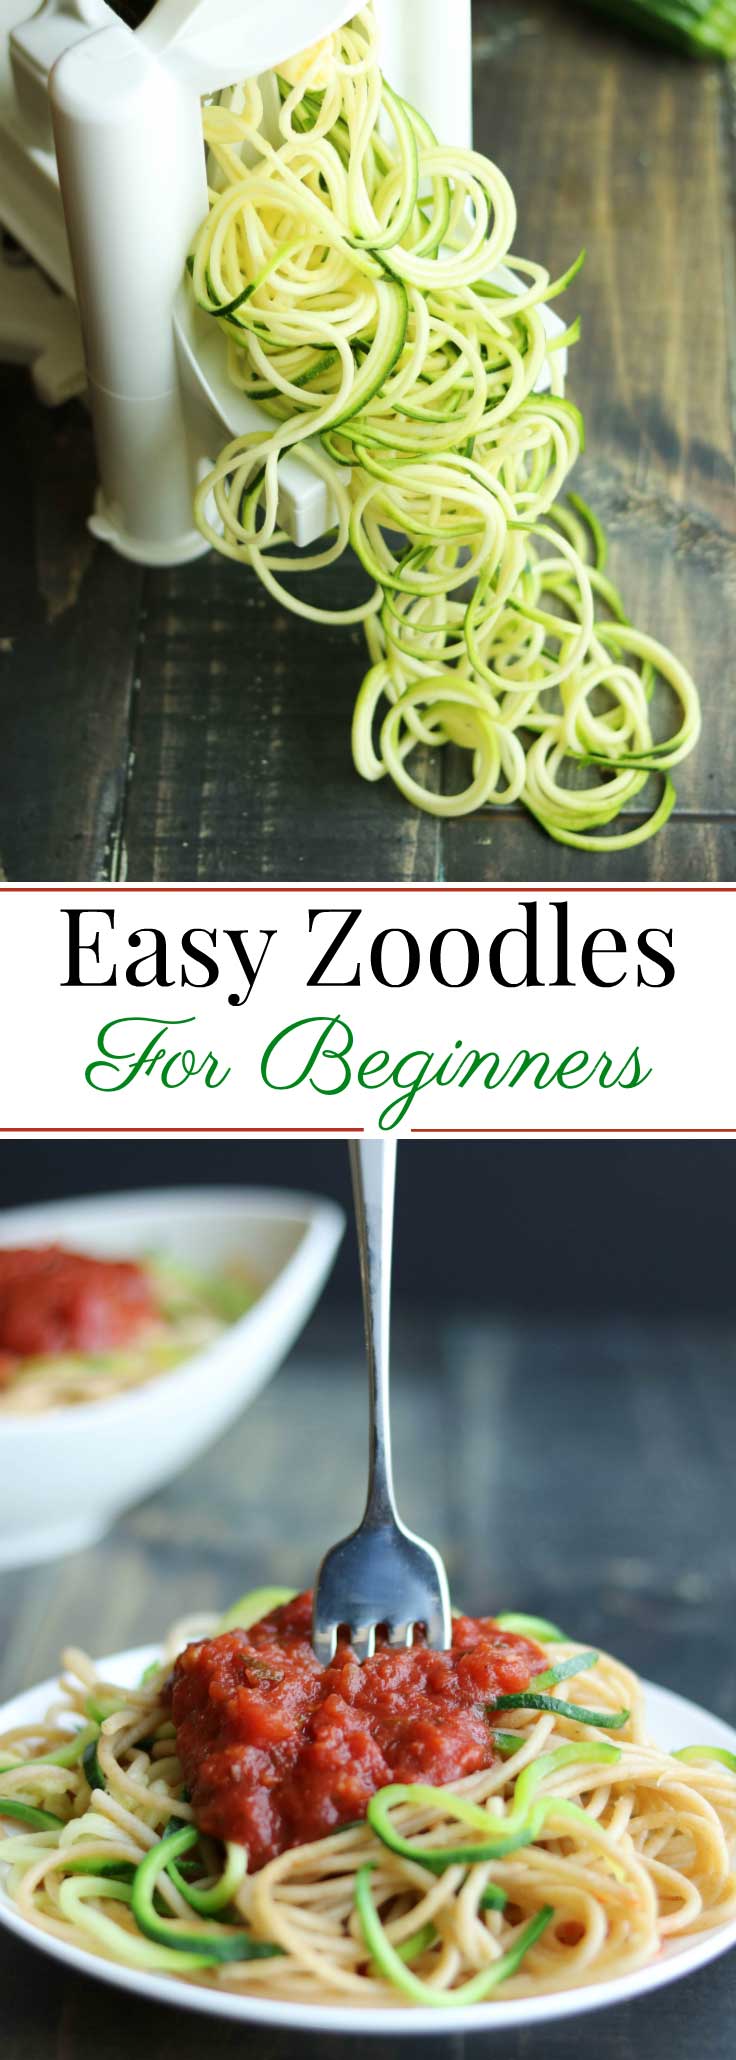 Want to try Zoodles? Here’s how to start! This super-easy basic Zoodles Recipe is the perfect way to ease your family into trying Zucchini Noodles. By mixing spiralized Zoodles and spaghetti, you reap benefits all around … reduced calories and great vitamins from the zucchini noodles, plus all the fiber and whole-grain goodness of whole wheat spaghetti. Spiralizer recipes are a fun, creative way to eat more veggies … and this easy Zoodle Recipe is a great first step! | www.TwoHealthyKitchens.com